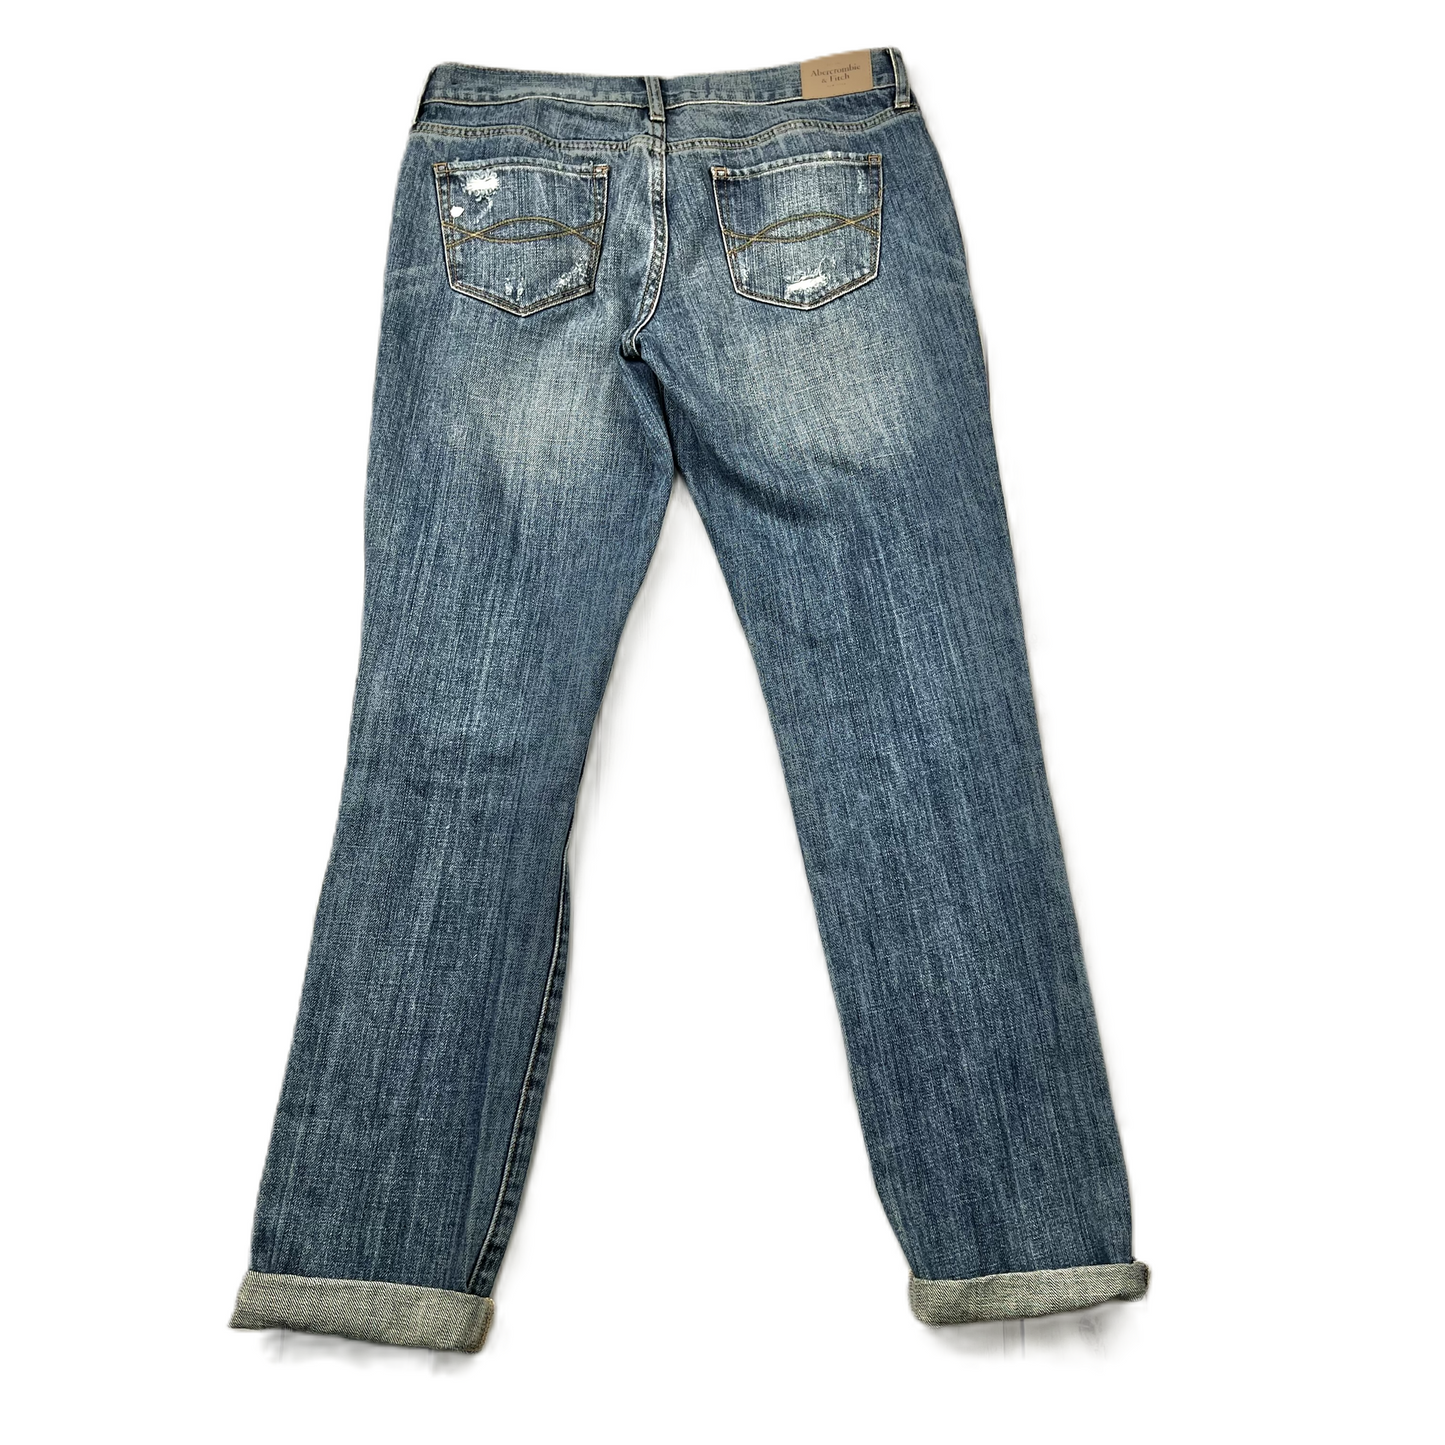 Blue Denim Jeans Boot Cut By Abercrombie And Fitch, Size: 4